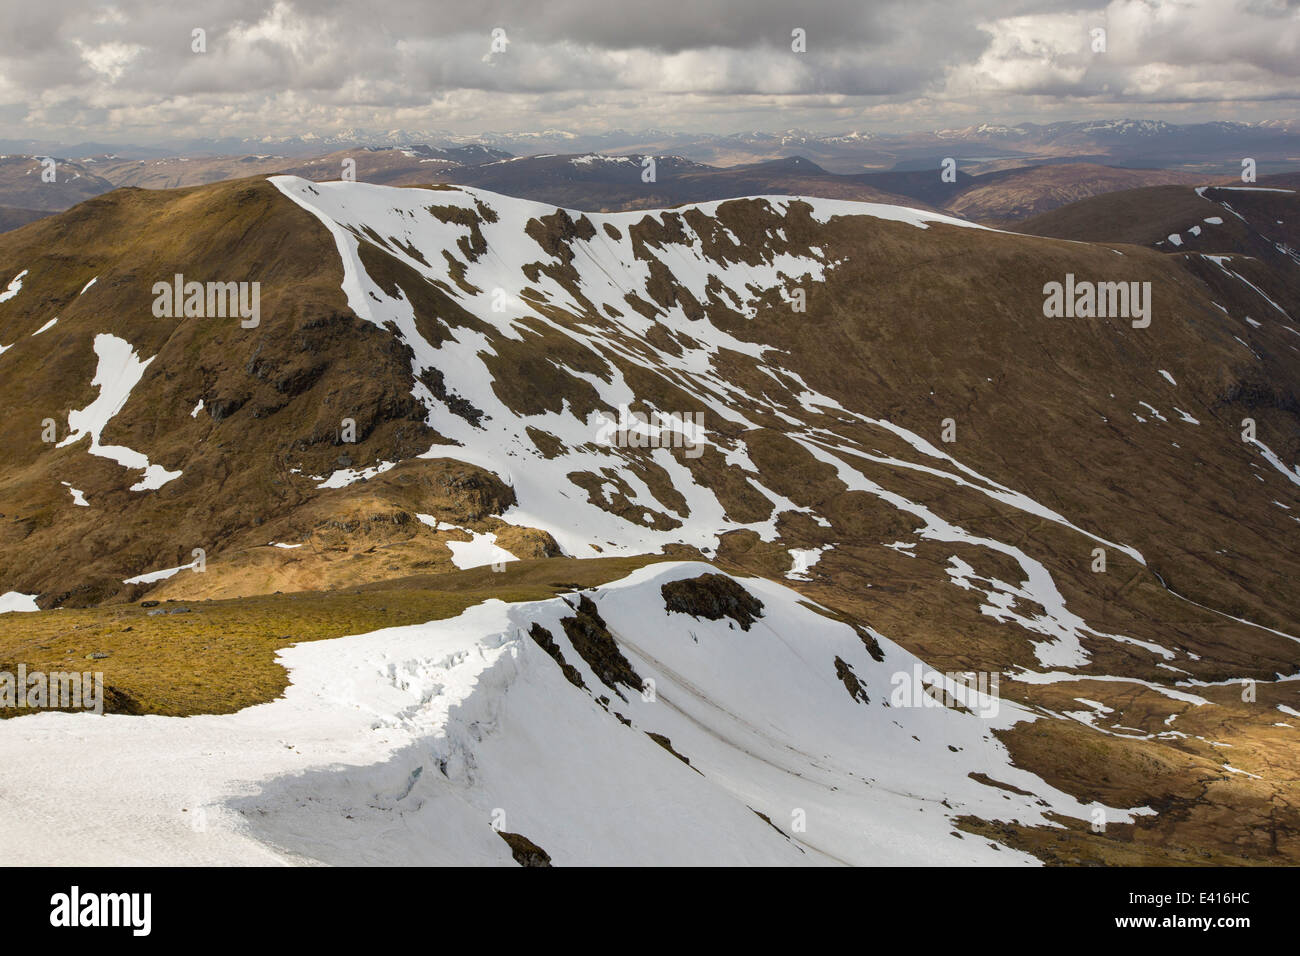 Looking towards Beinn Ghlas and Meall Corranaich Munro's from Ben Lawers above Loch Tay in the Scottish Highlands, UK. Stock Photo